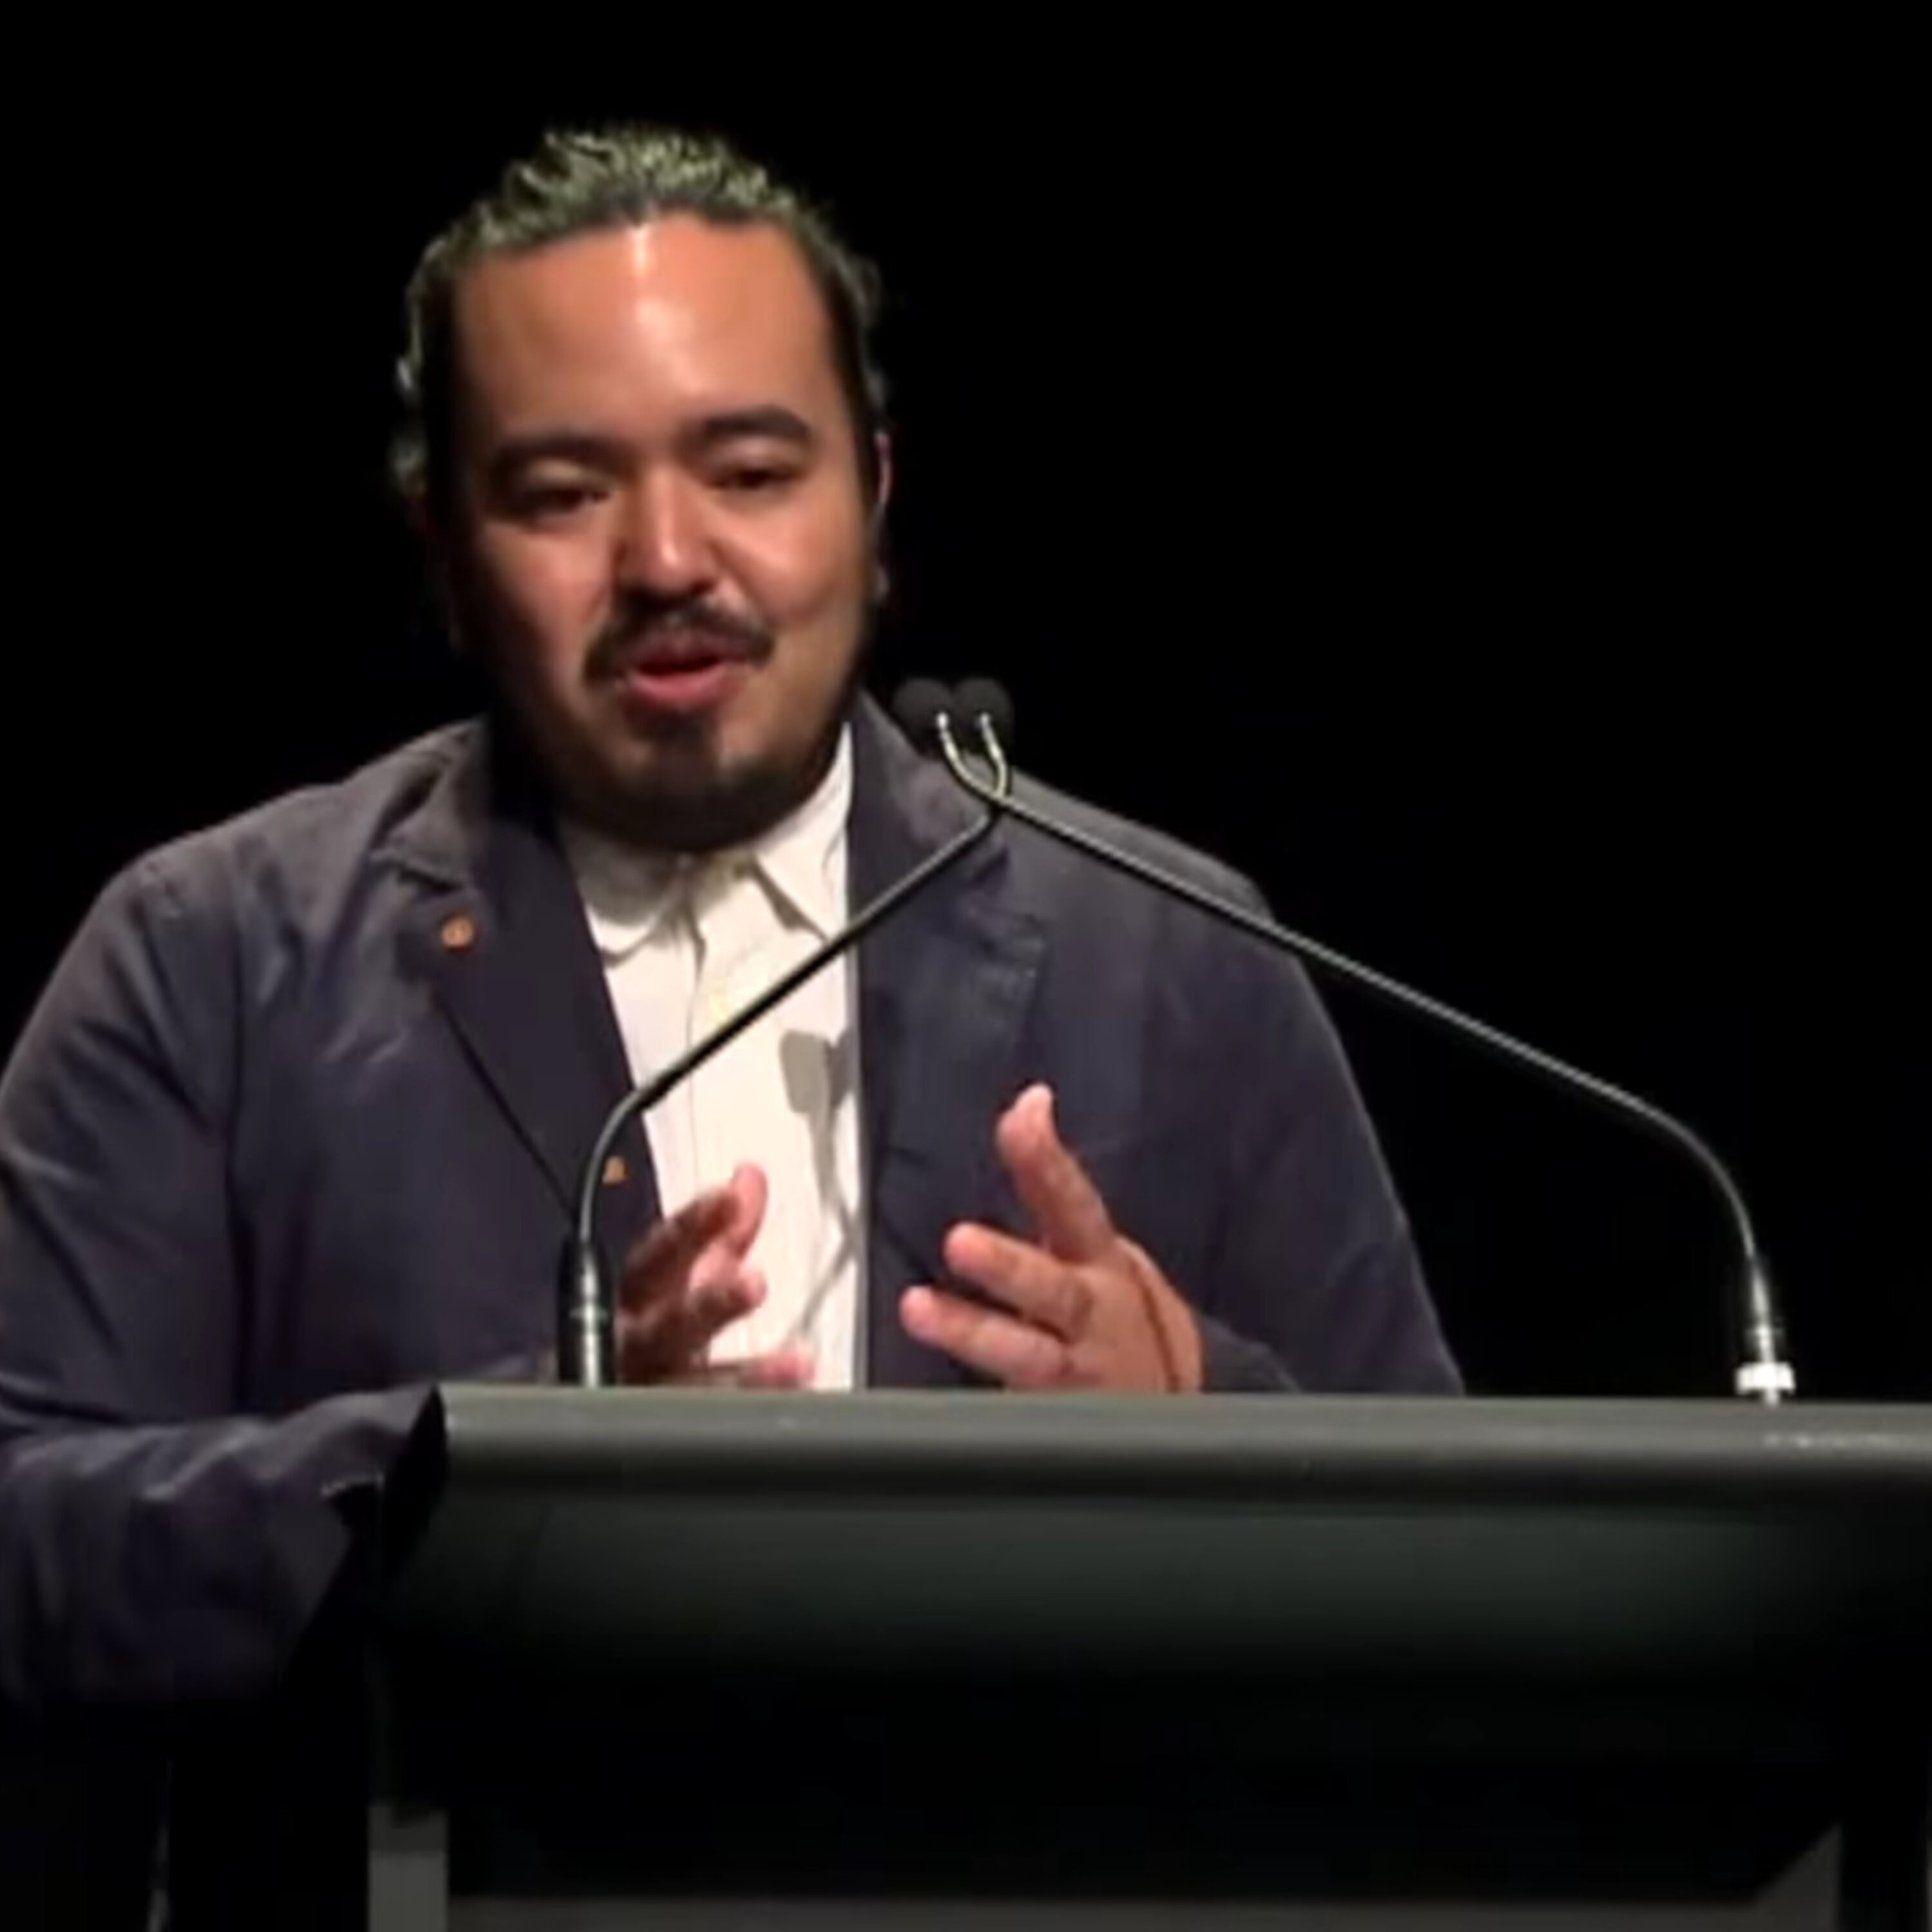 Adam Liaw: What is the difference between muffins and cupcakes?